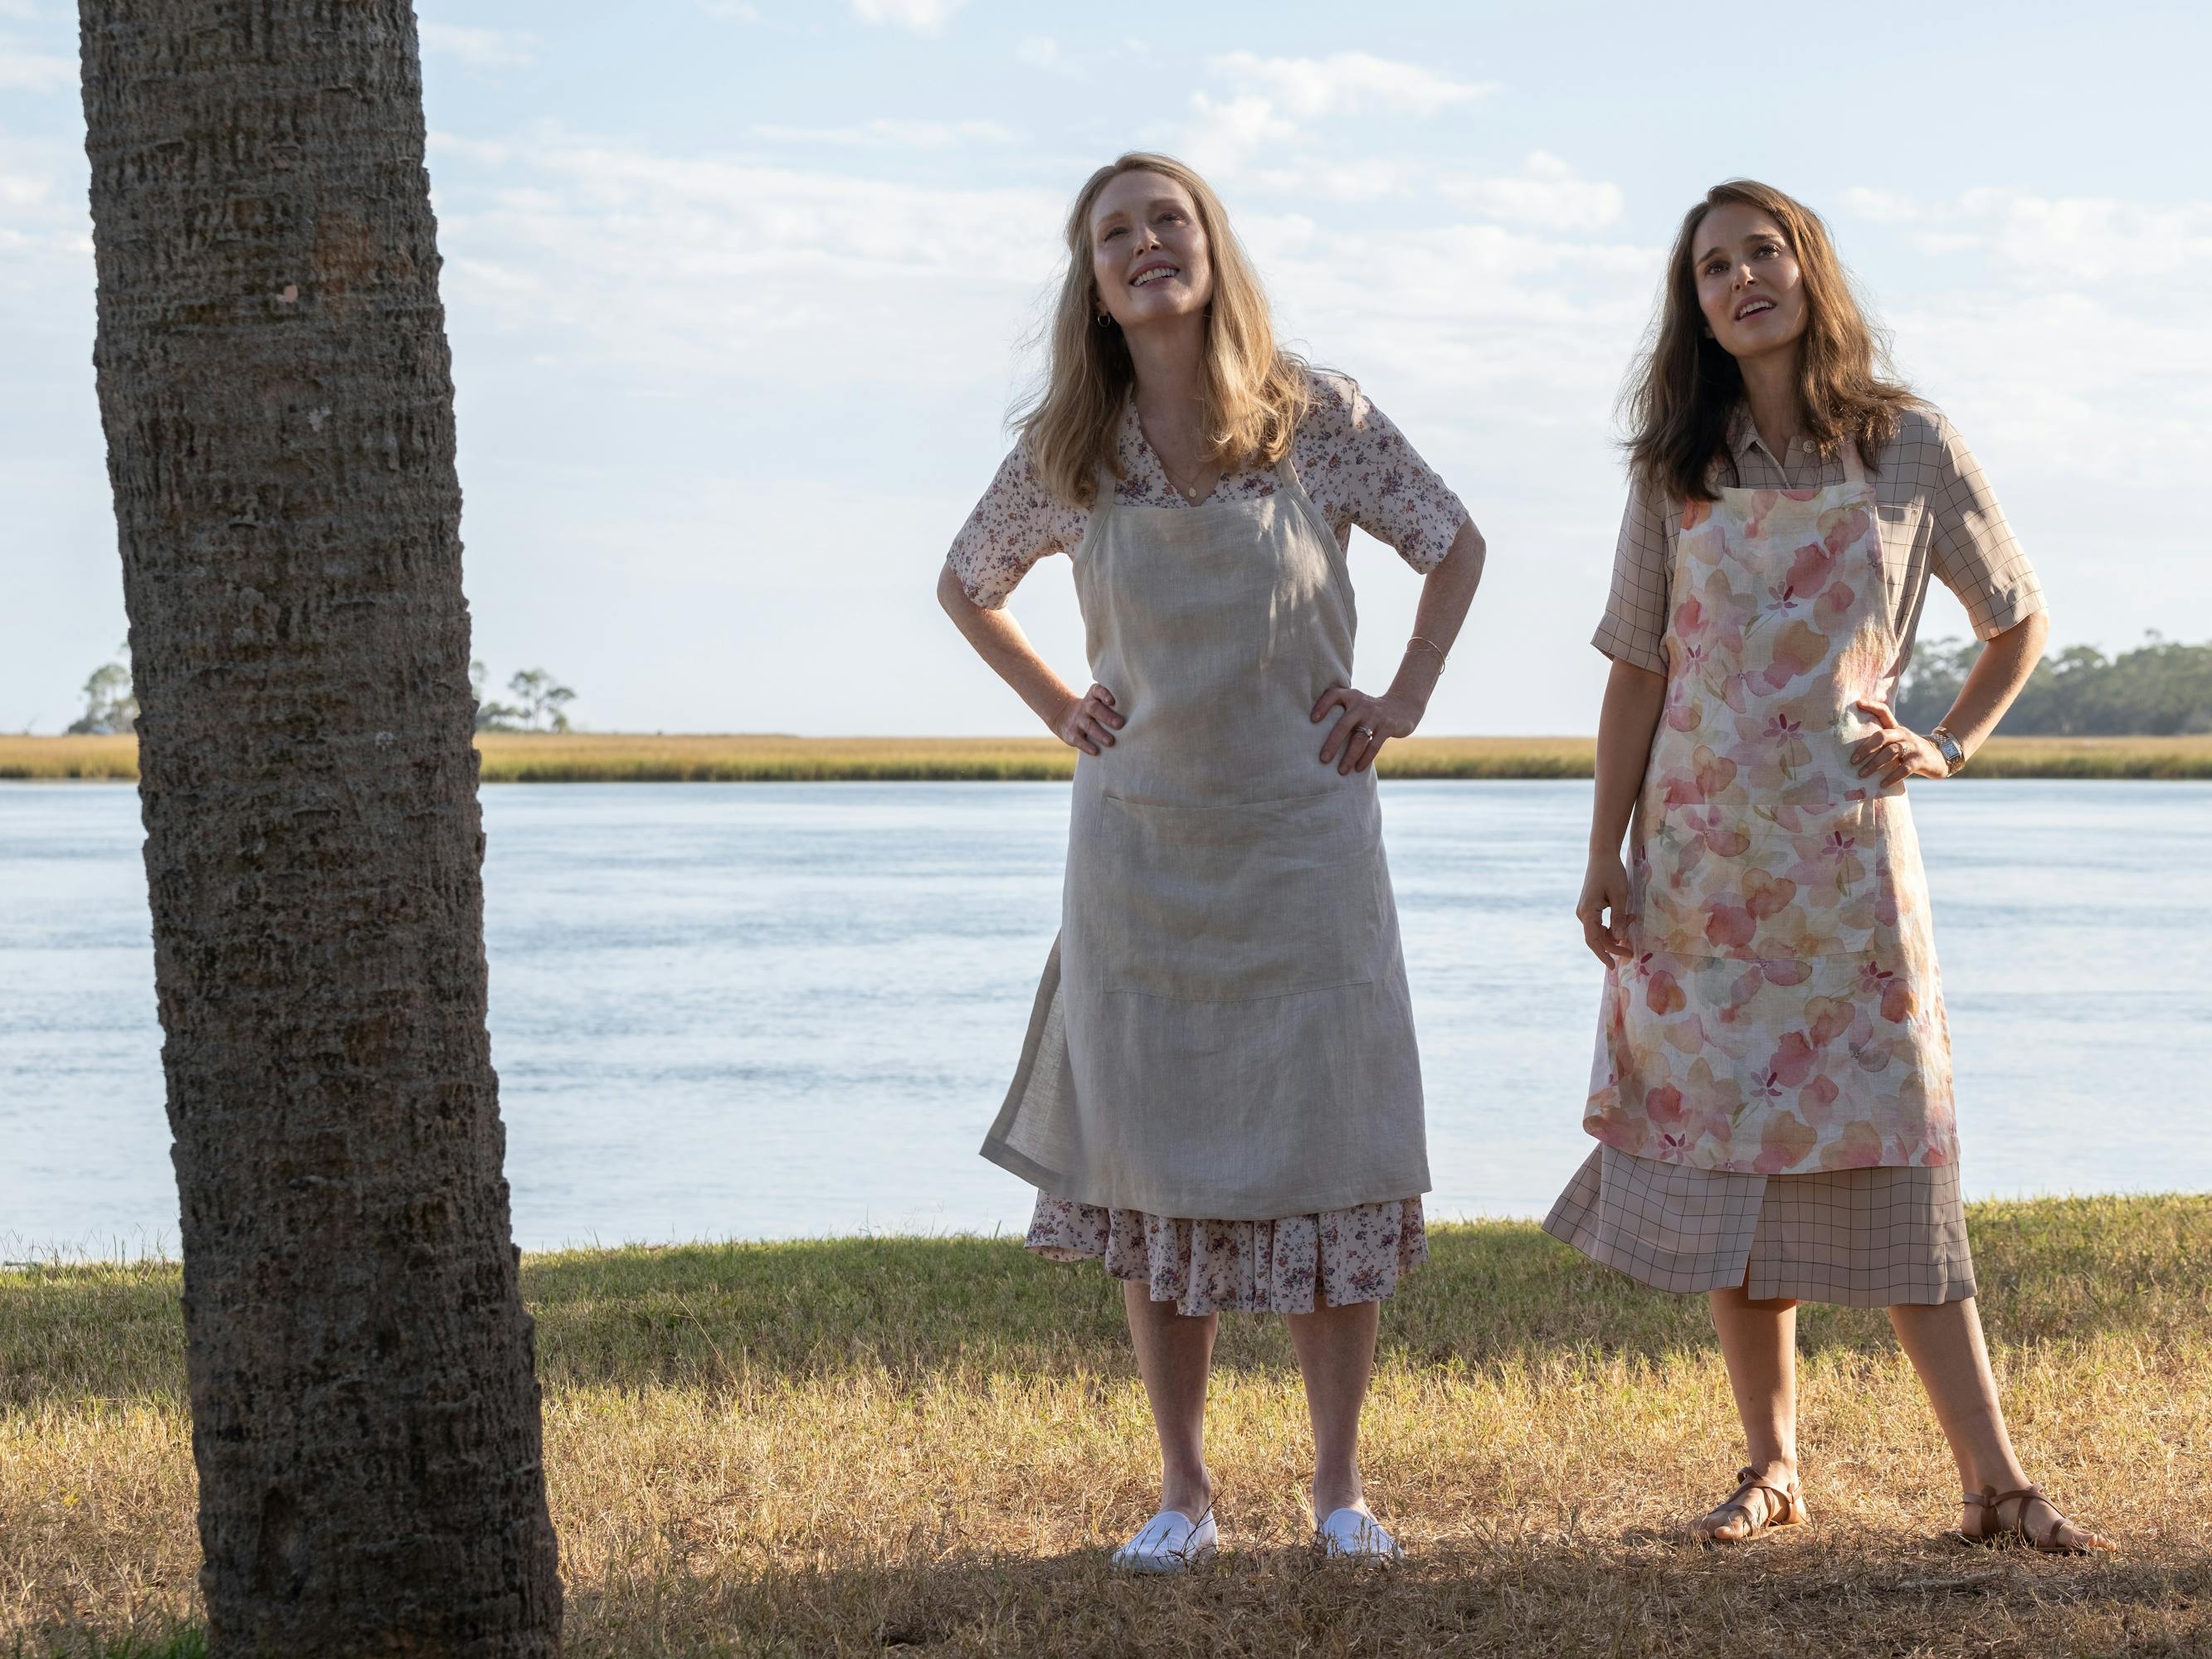 Gracie Atherton-Yoo (Julianne Moore) and Elizabeth Berry (Natalie Portman) stand under a tree.